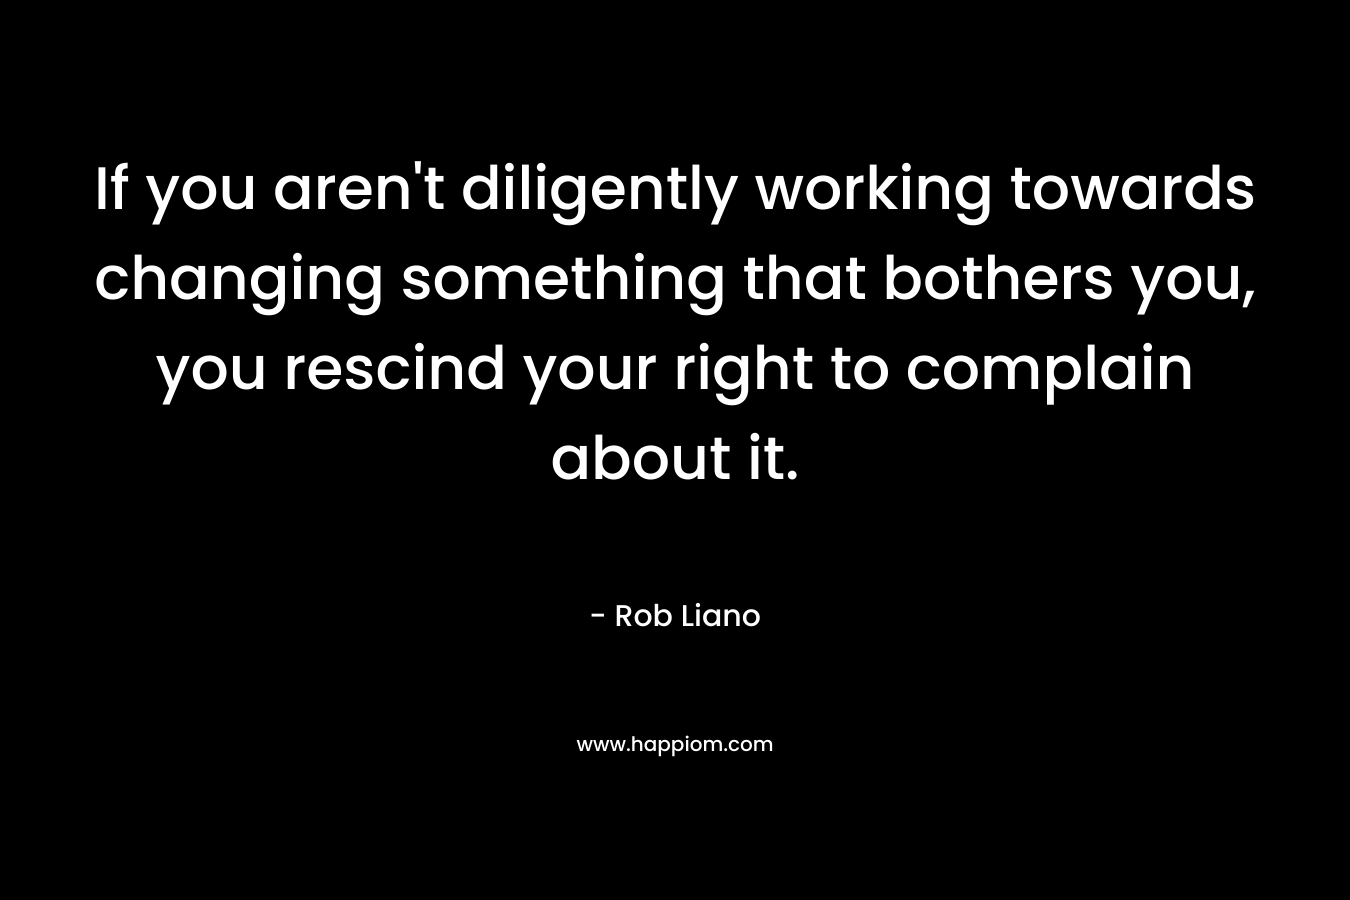 If you aren't diligently working towards changing something that bothers you, you rescind your right to complain about it.